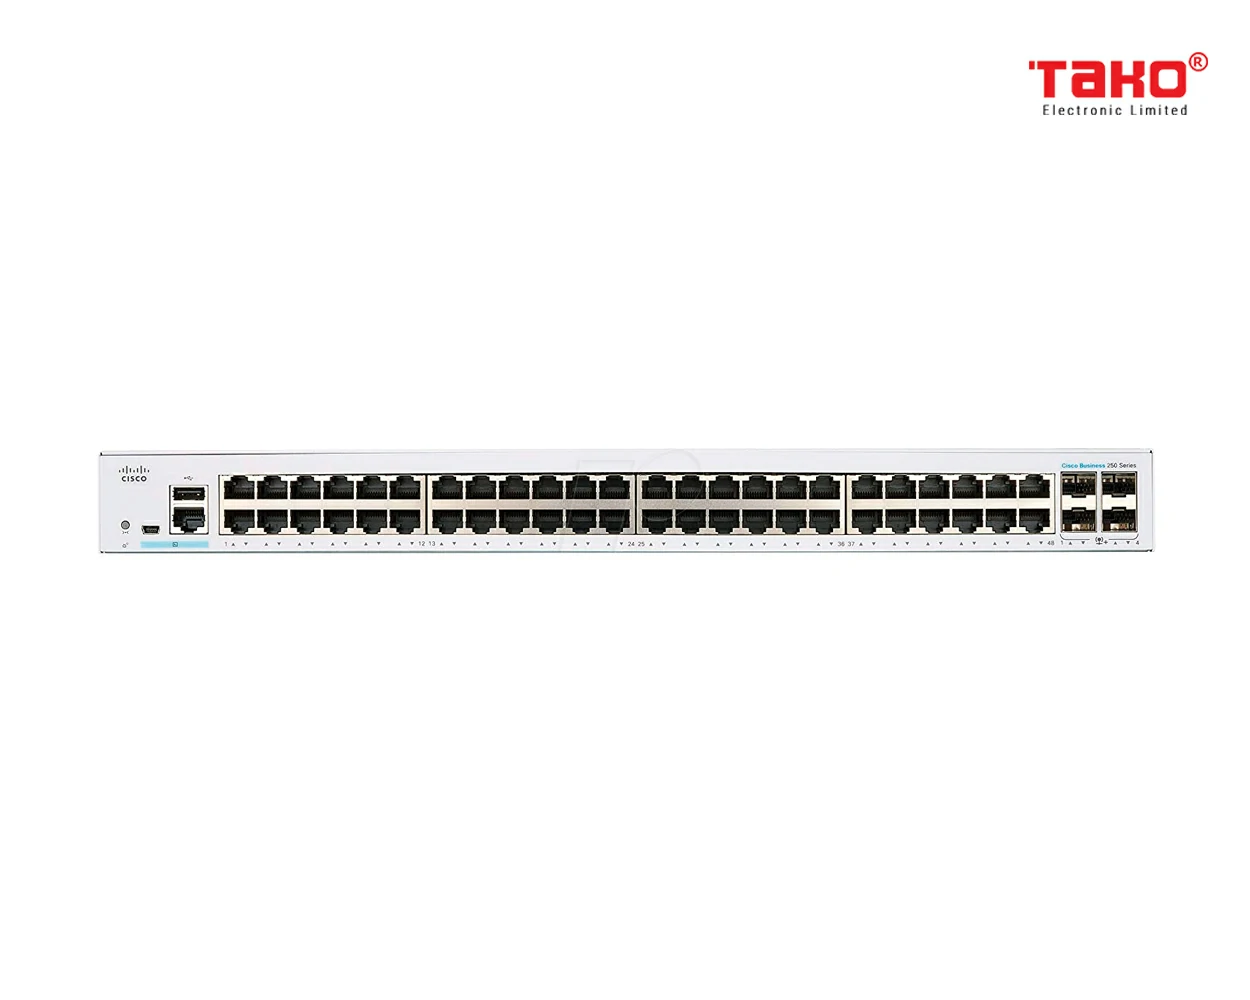 Cisco CBS250-48T-4G 48 port 10/100/1000 Mbps Layer 2 manageable web switch + 4 x 1 Gbps SFP slots 4